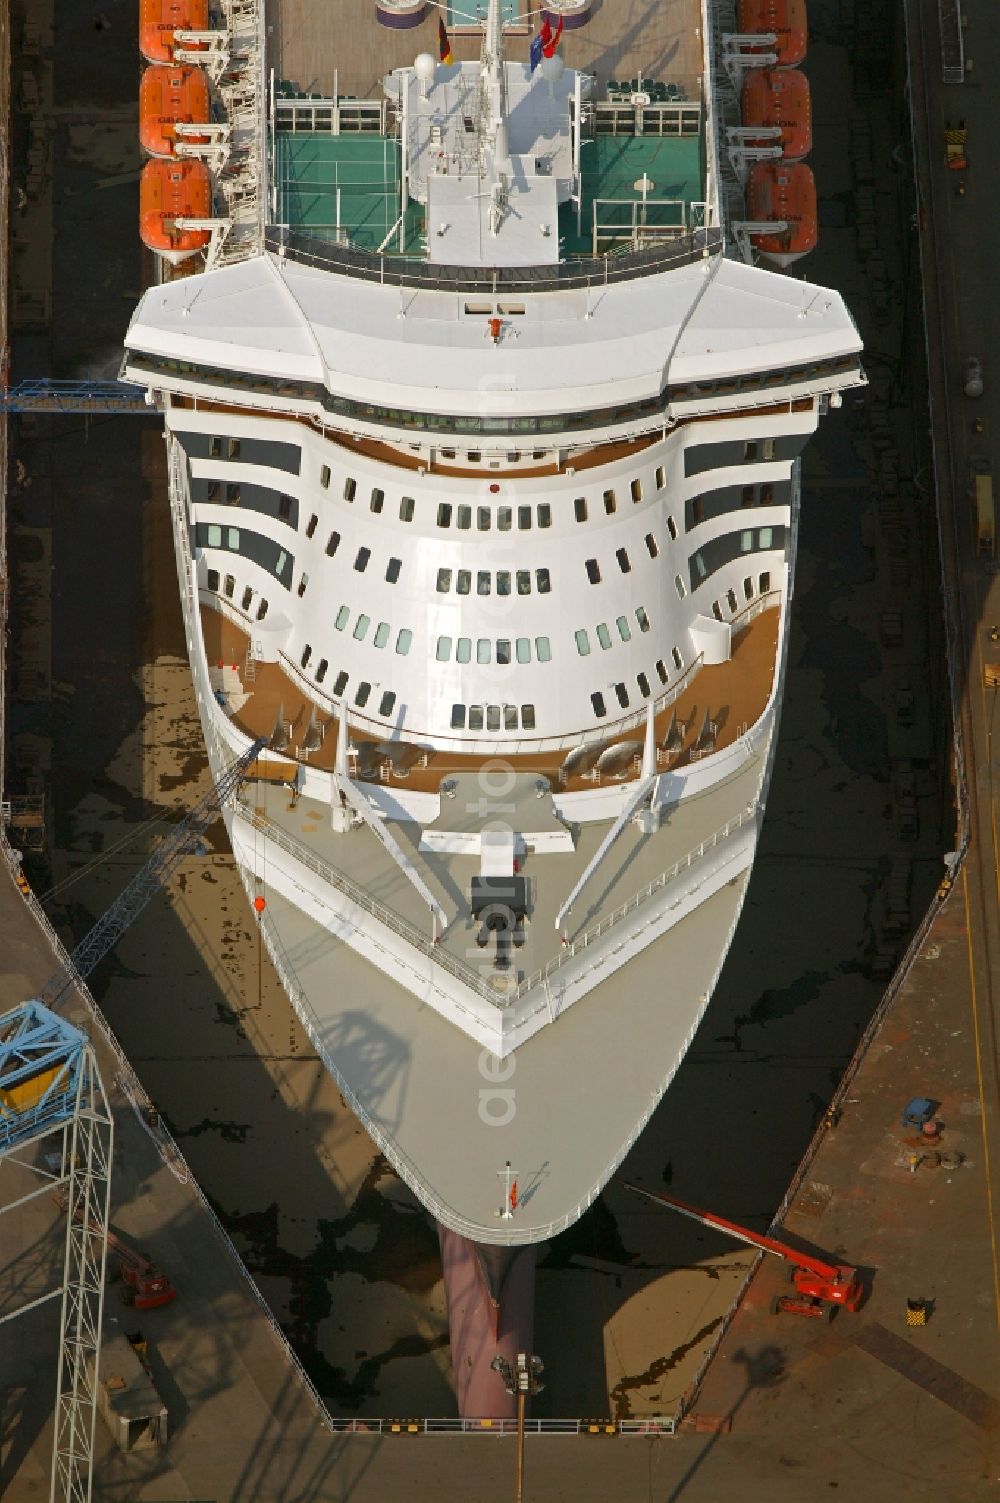 Hamburg from the bird's eye view: Passenger ship and luxury liner Queen Mary 2 on the Elbe 17 dry dock of Blohm and Voss in Hamburg company for maintenance and repairs. It is at 345 meters, the largest passenger ship in the world. The German shipyard Blohm and Voss is a subsidiary of ThyssenKrupp AG